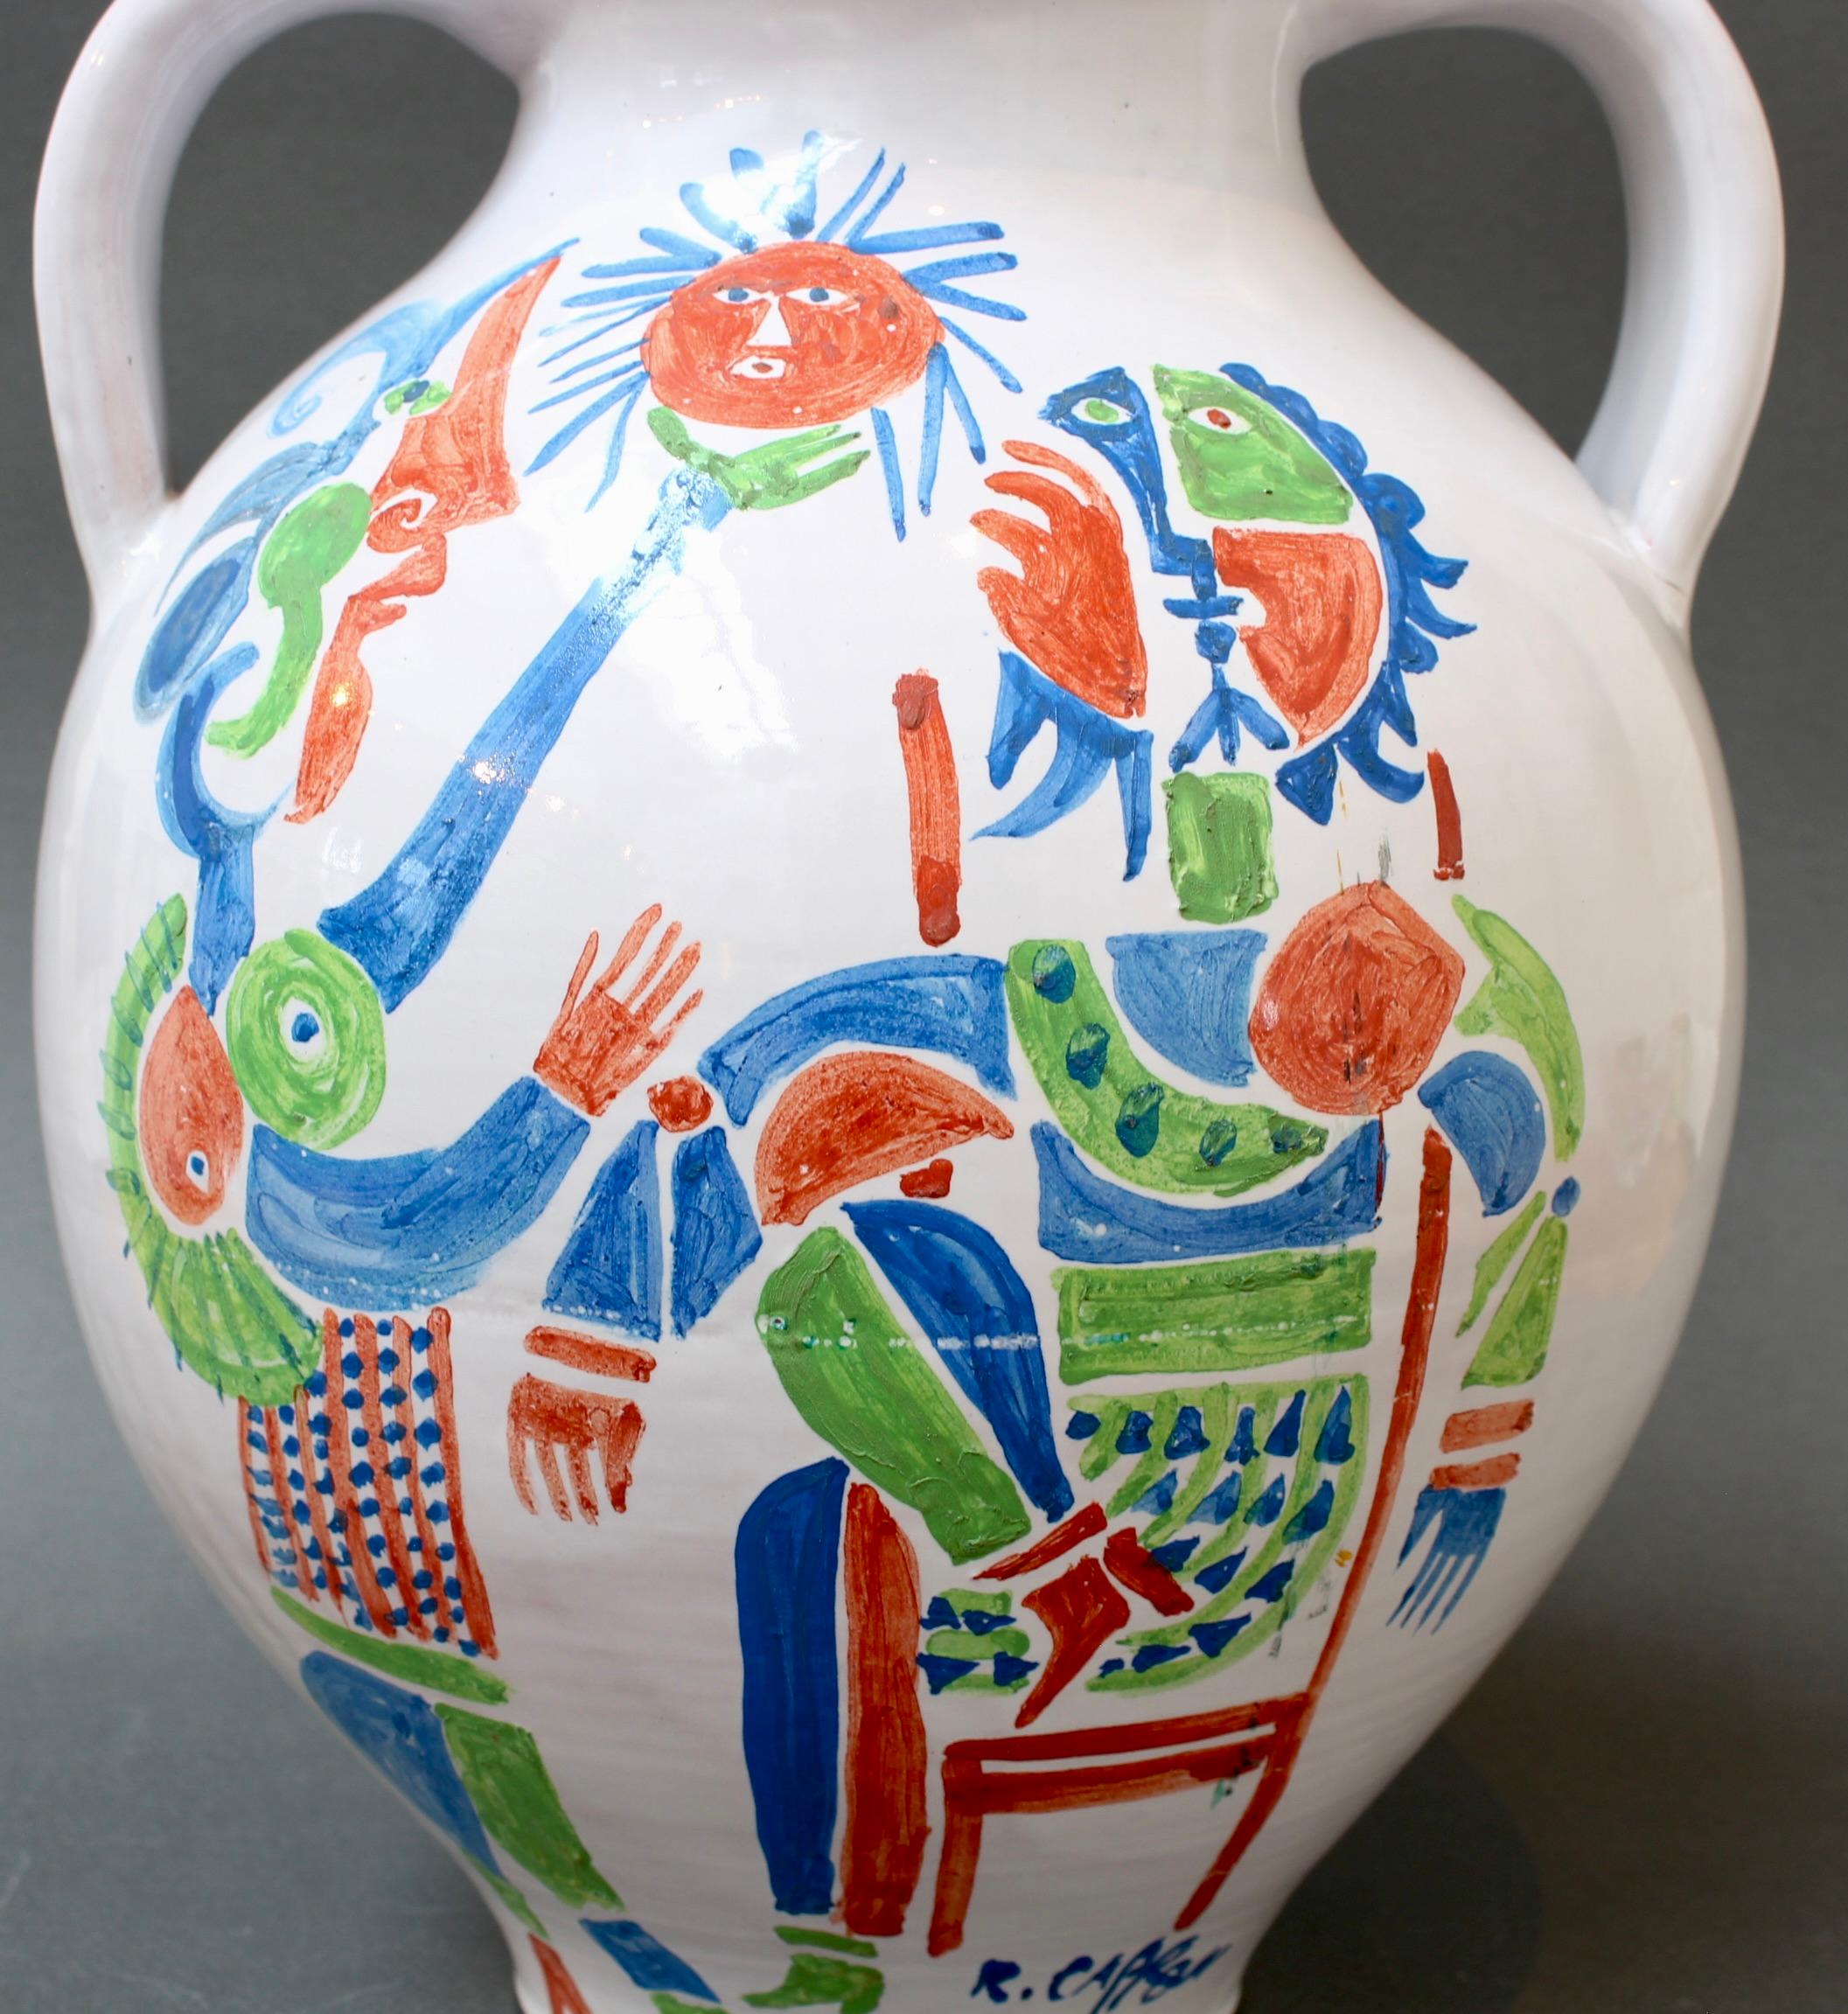 Vintage French Hand-Painted Ceramic Vase by Roger Capron (circa 1960s) For Sale 6